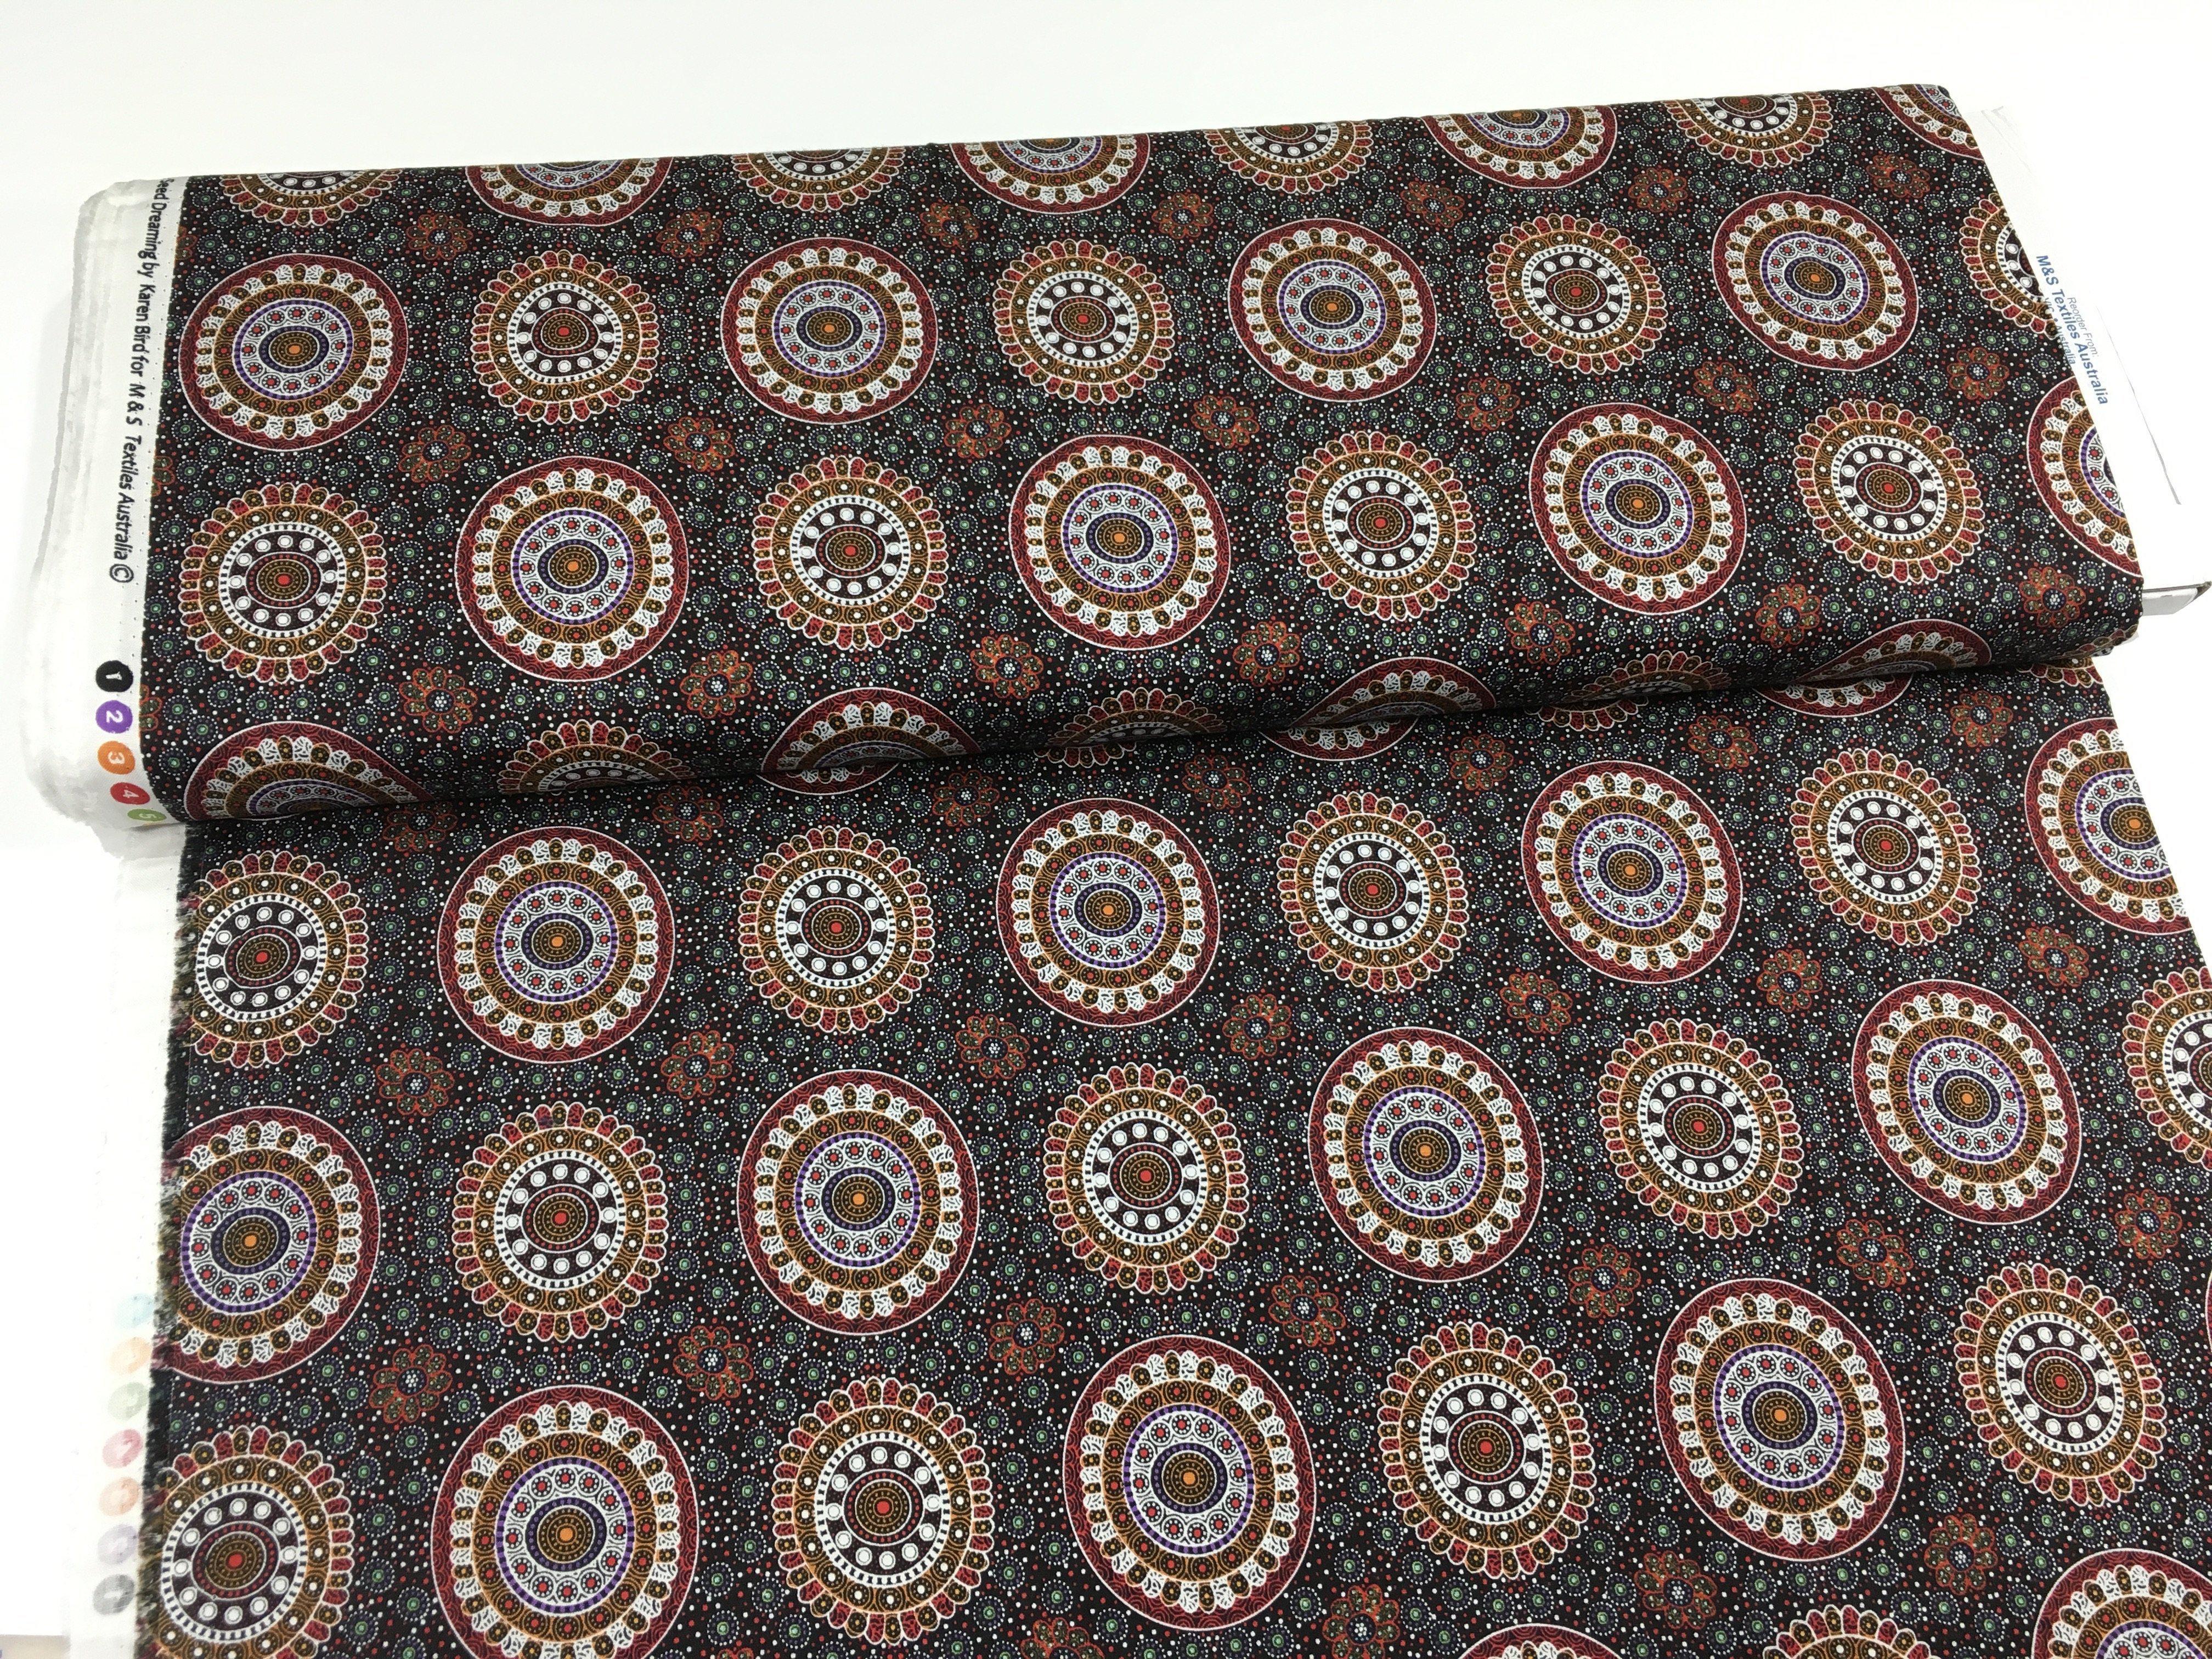 Alura Seed Dreaming Red Aboriginal Fabric-M & S Textiles Australia-My Favorite Quilt Store